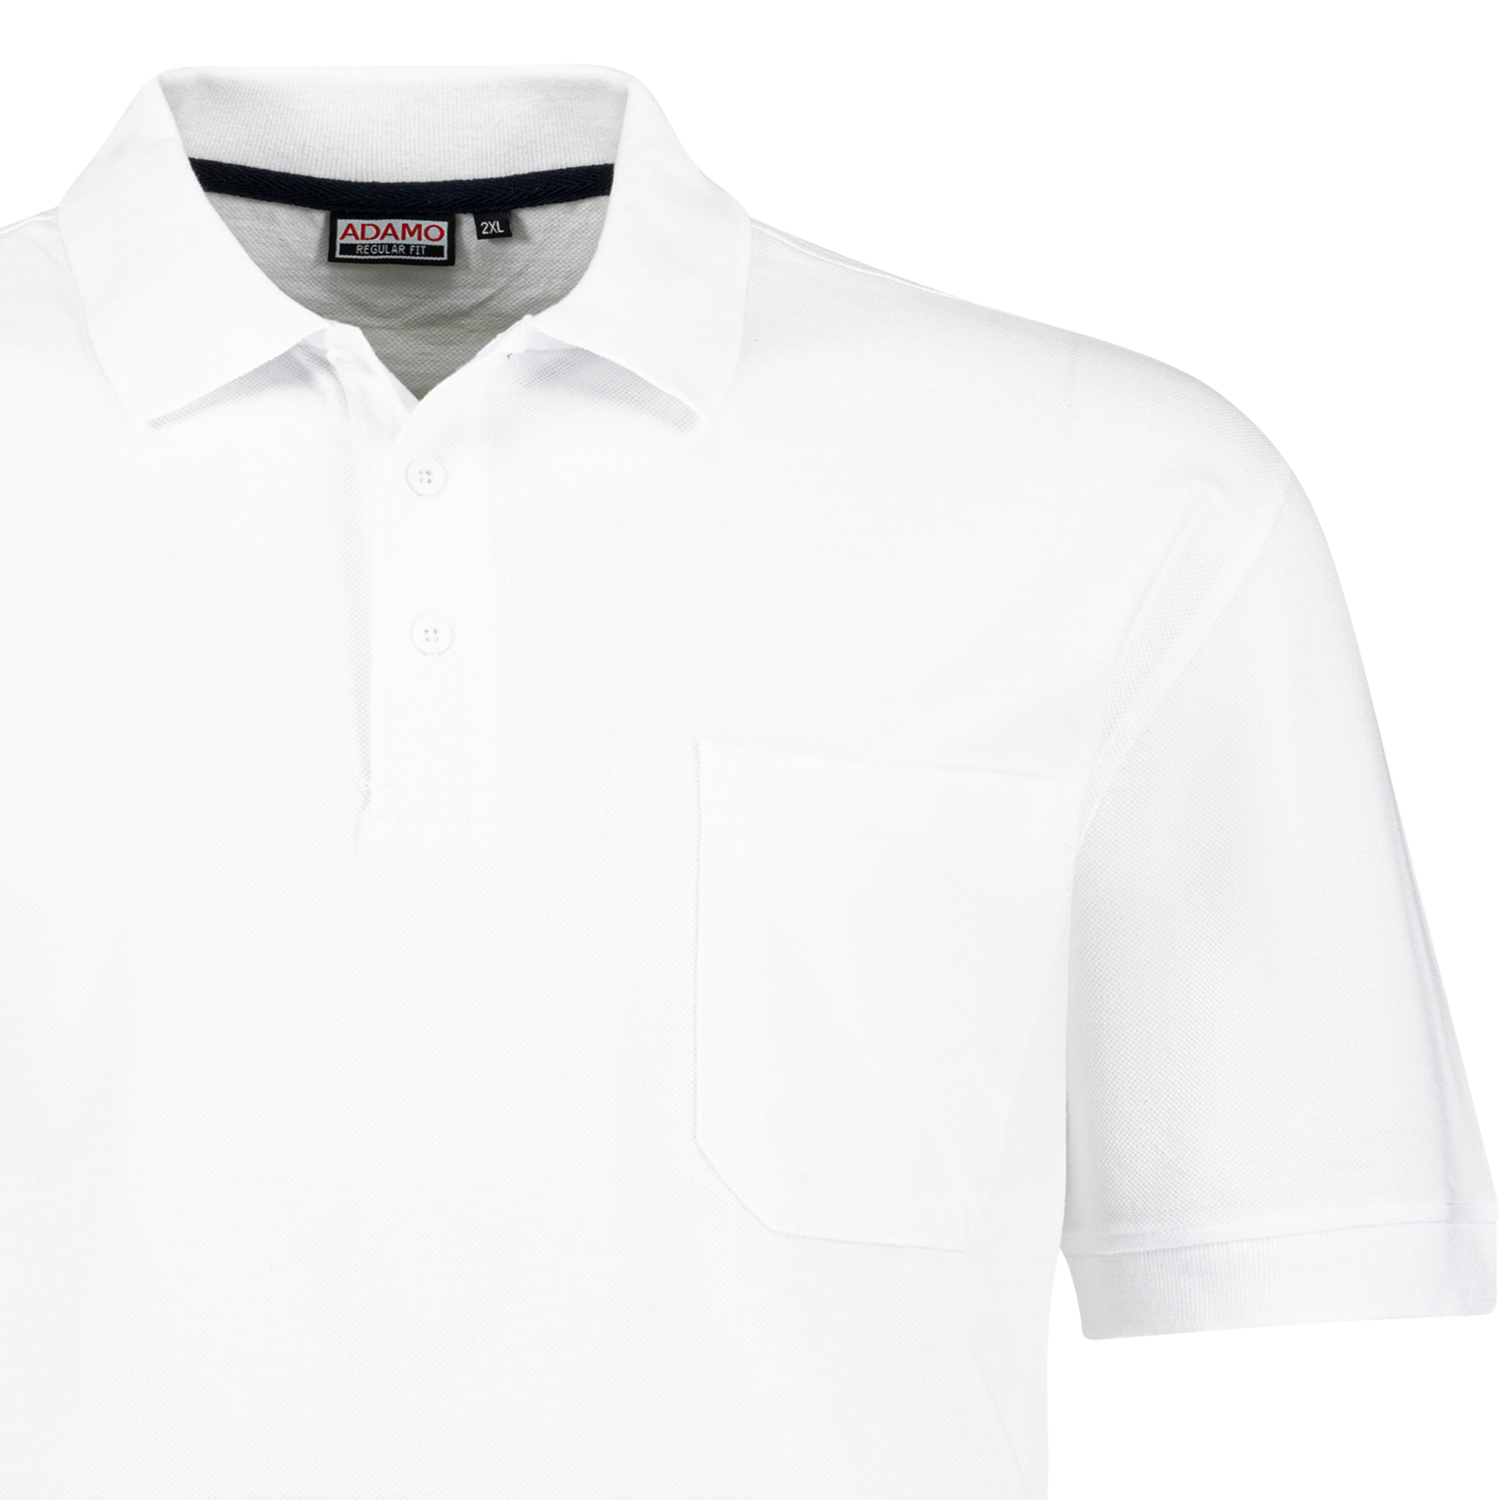 Short sleeve polo shirt REGULAR FIT series Keno by Adamo in white up to oversize 10XL